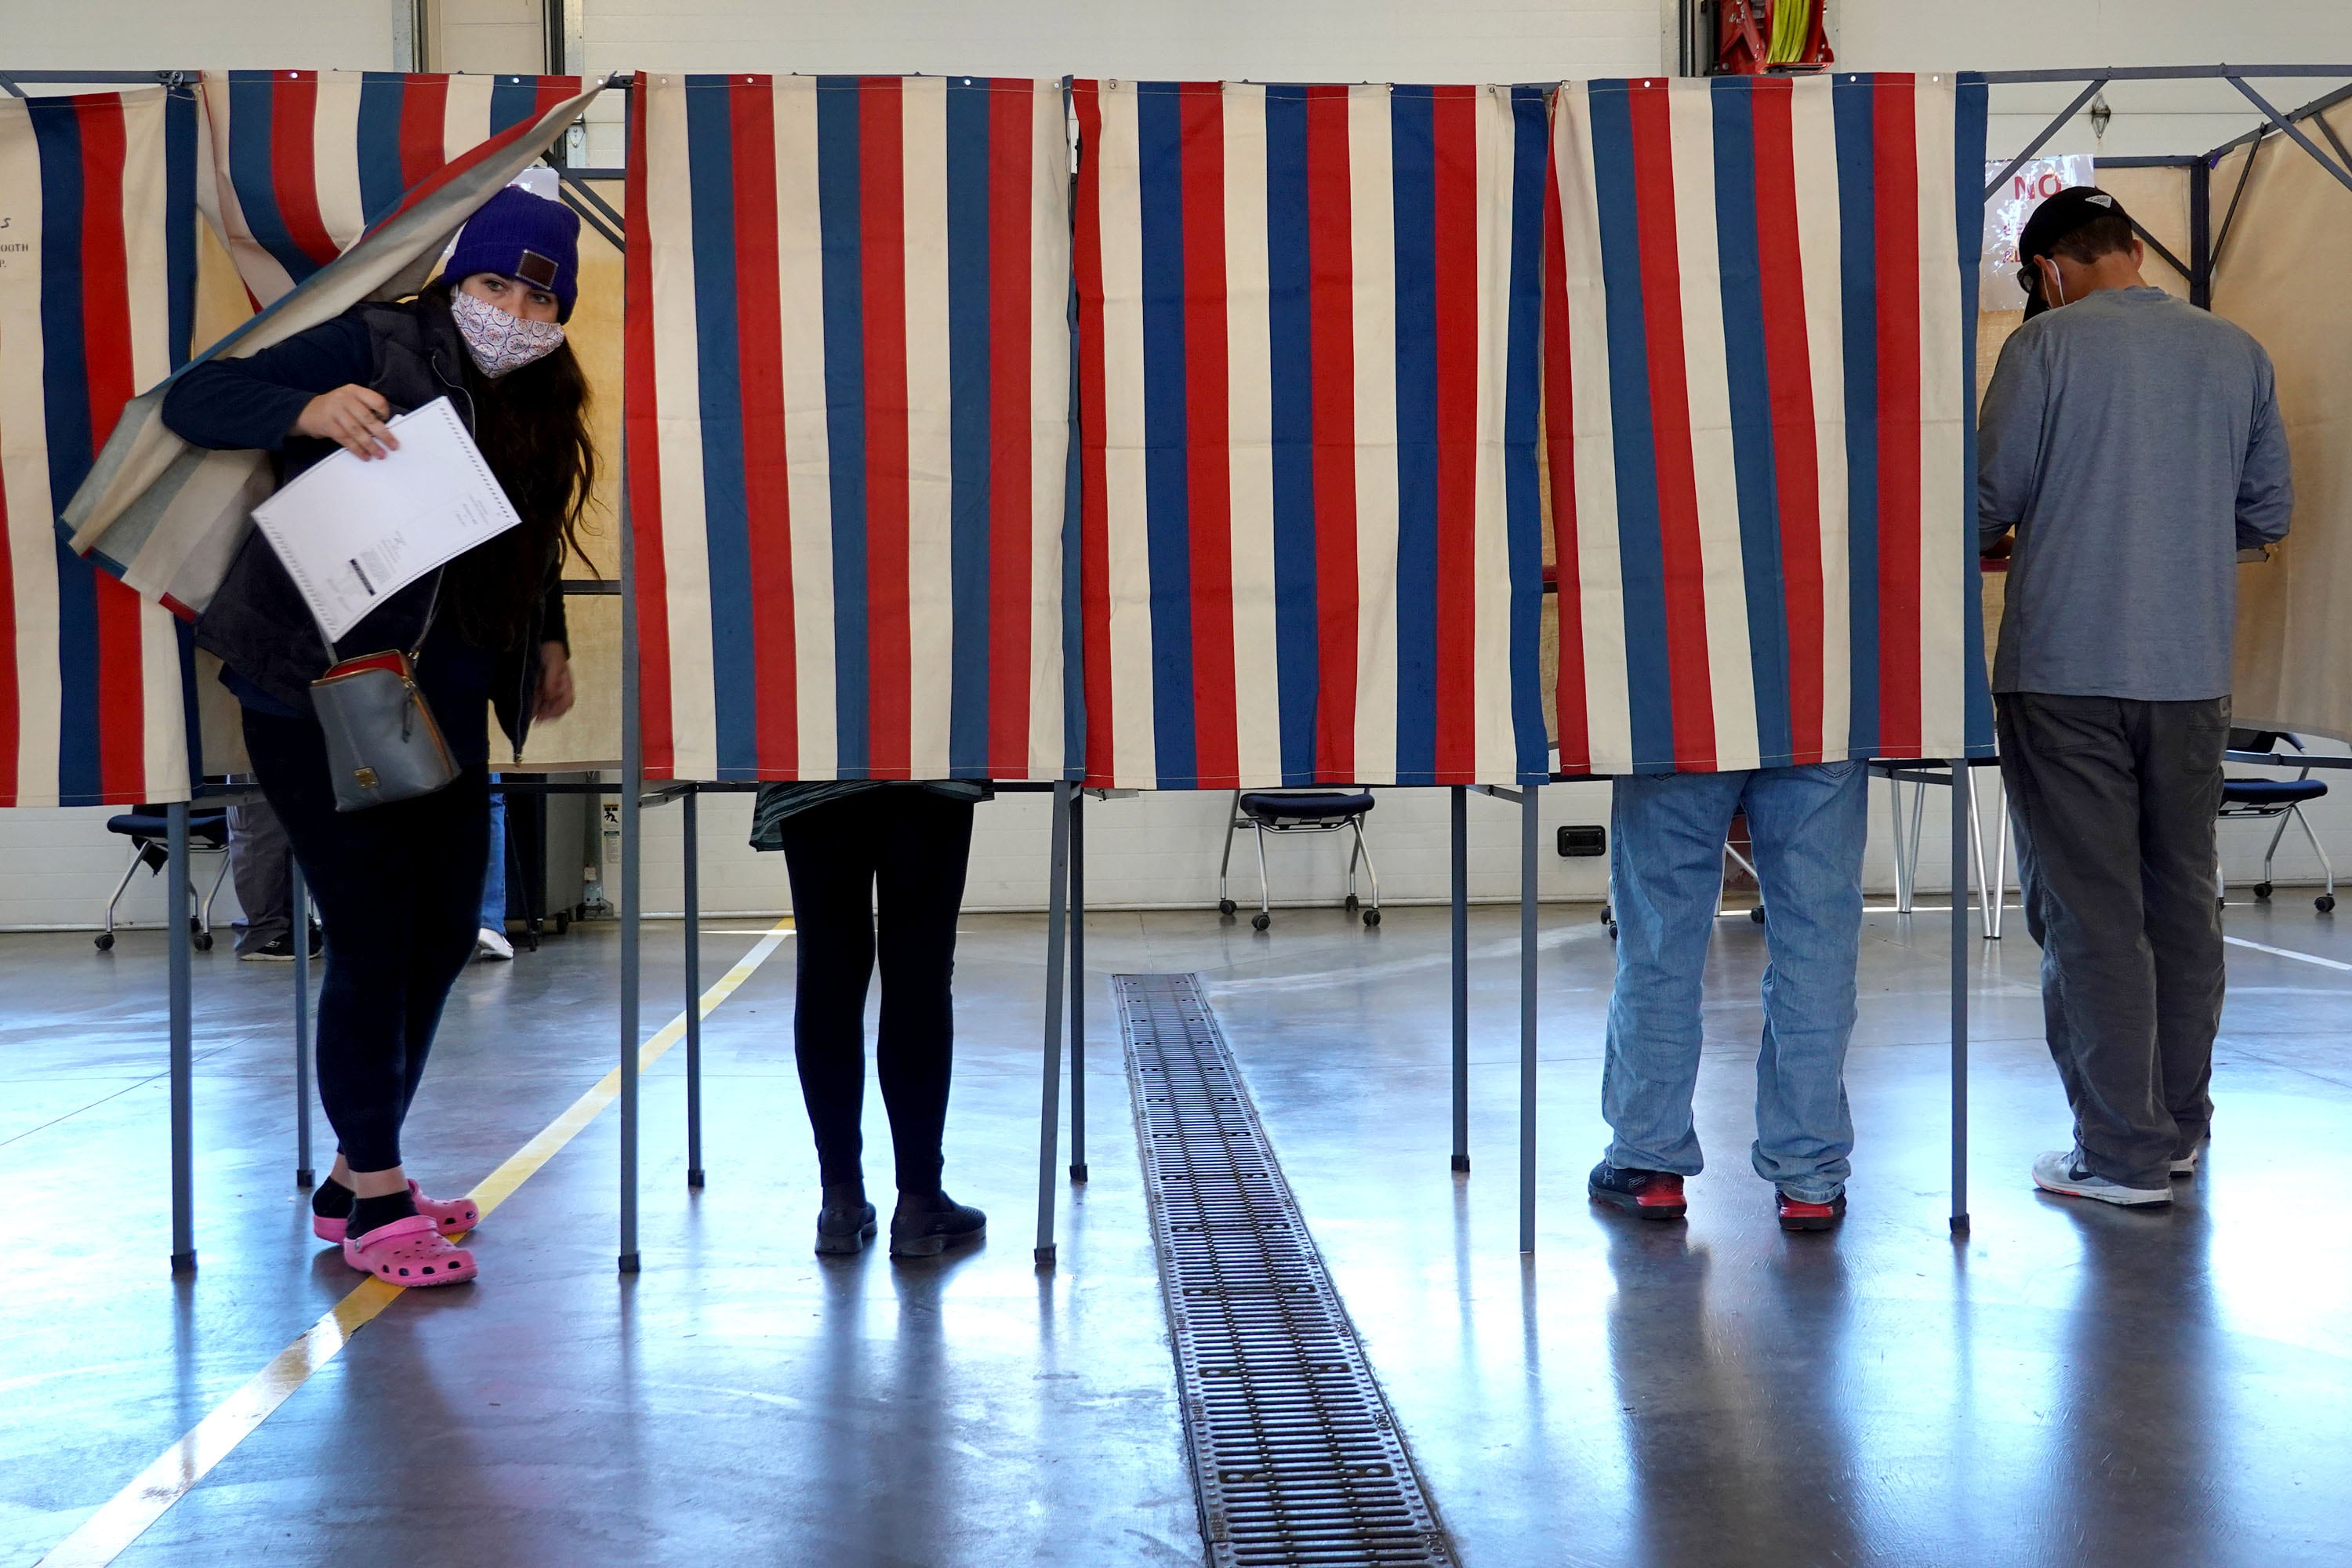 A person holding a ballot walks out from behind a voting booth curtain while three other people stand in the booth voting.